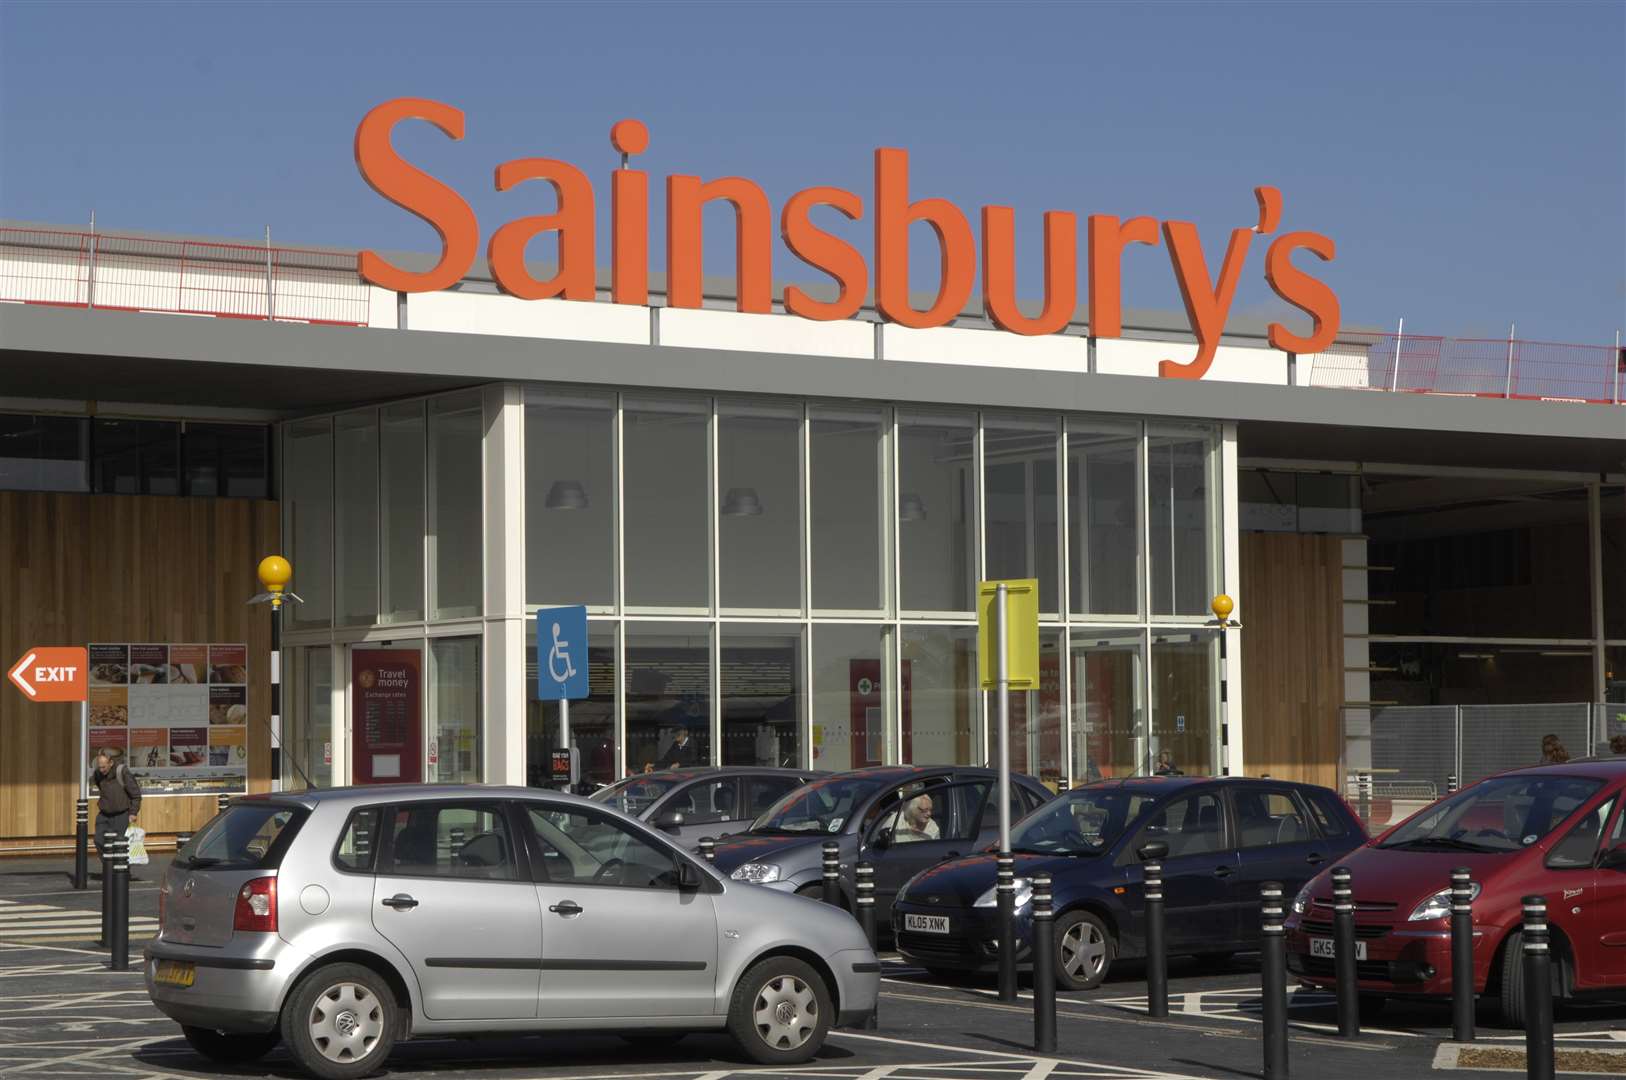 Sainsbury's has announced a restructure which will affect "thousands" of jobs. Picture: Gary Browne